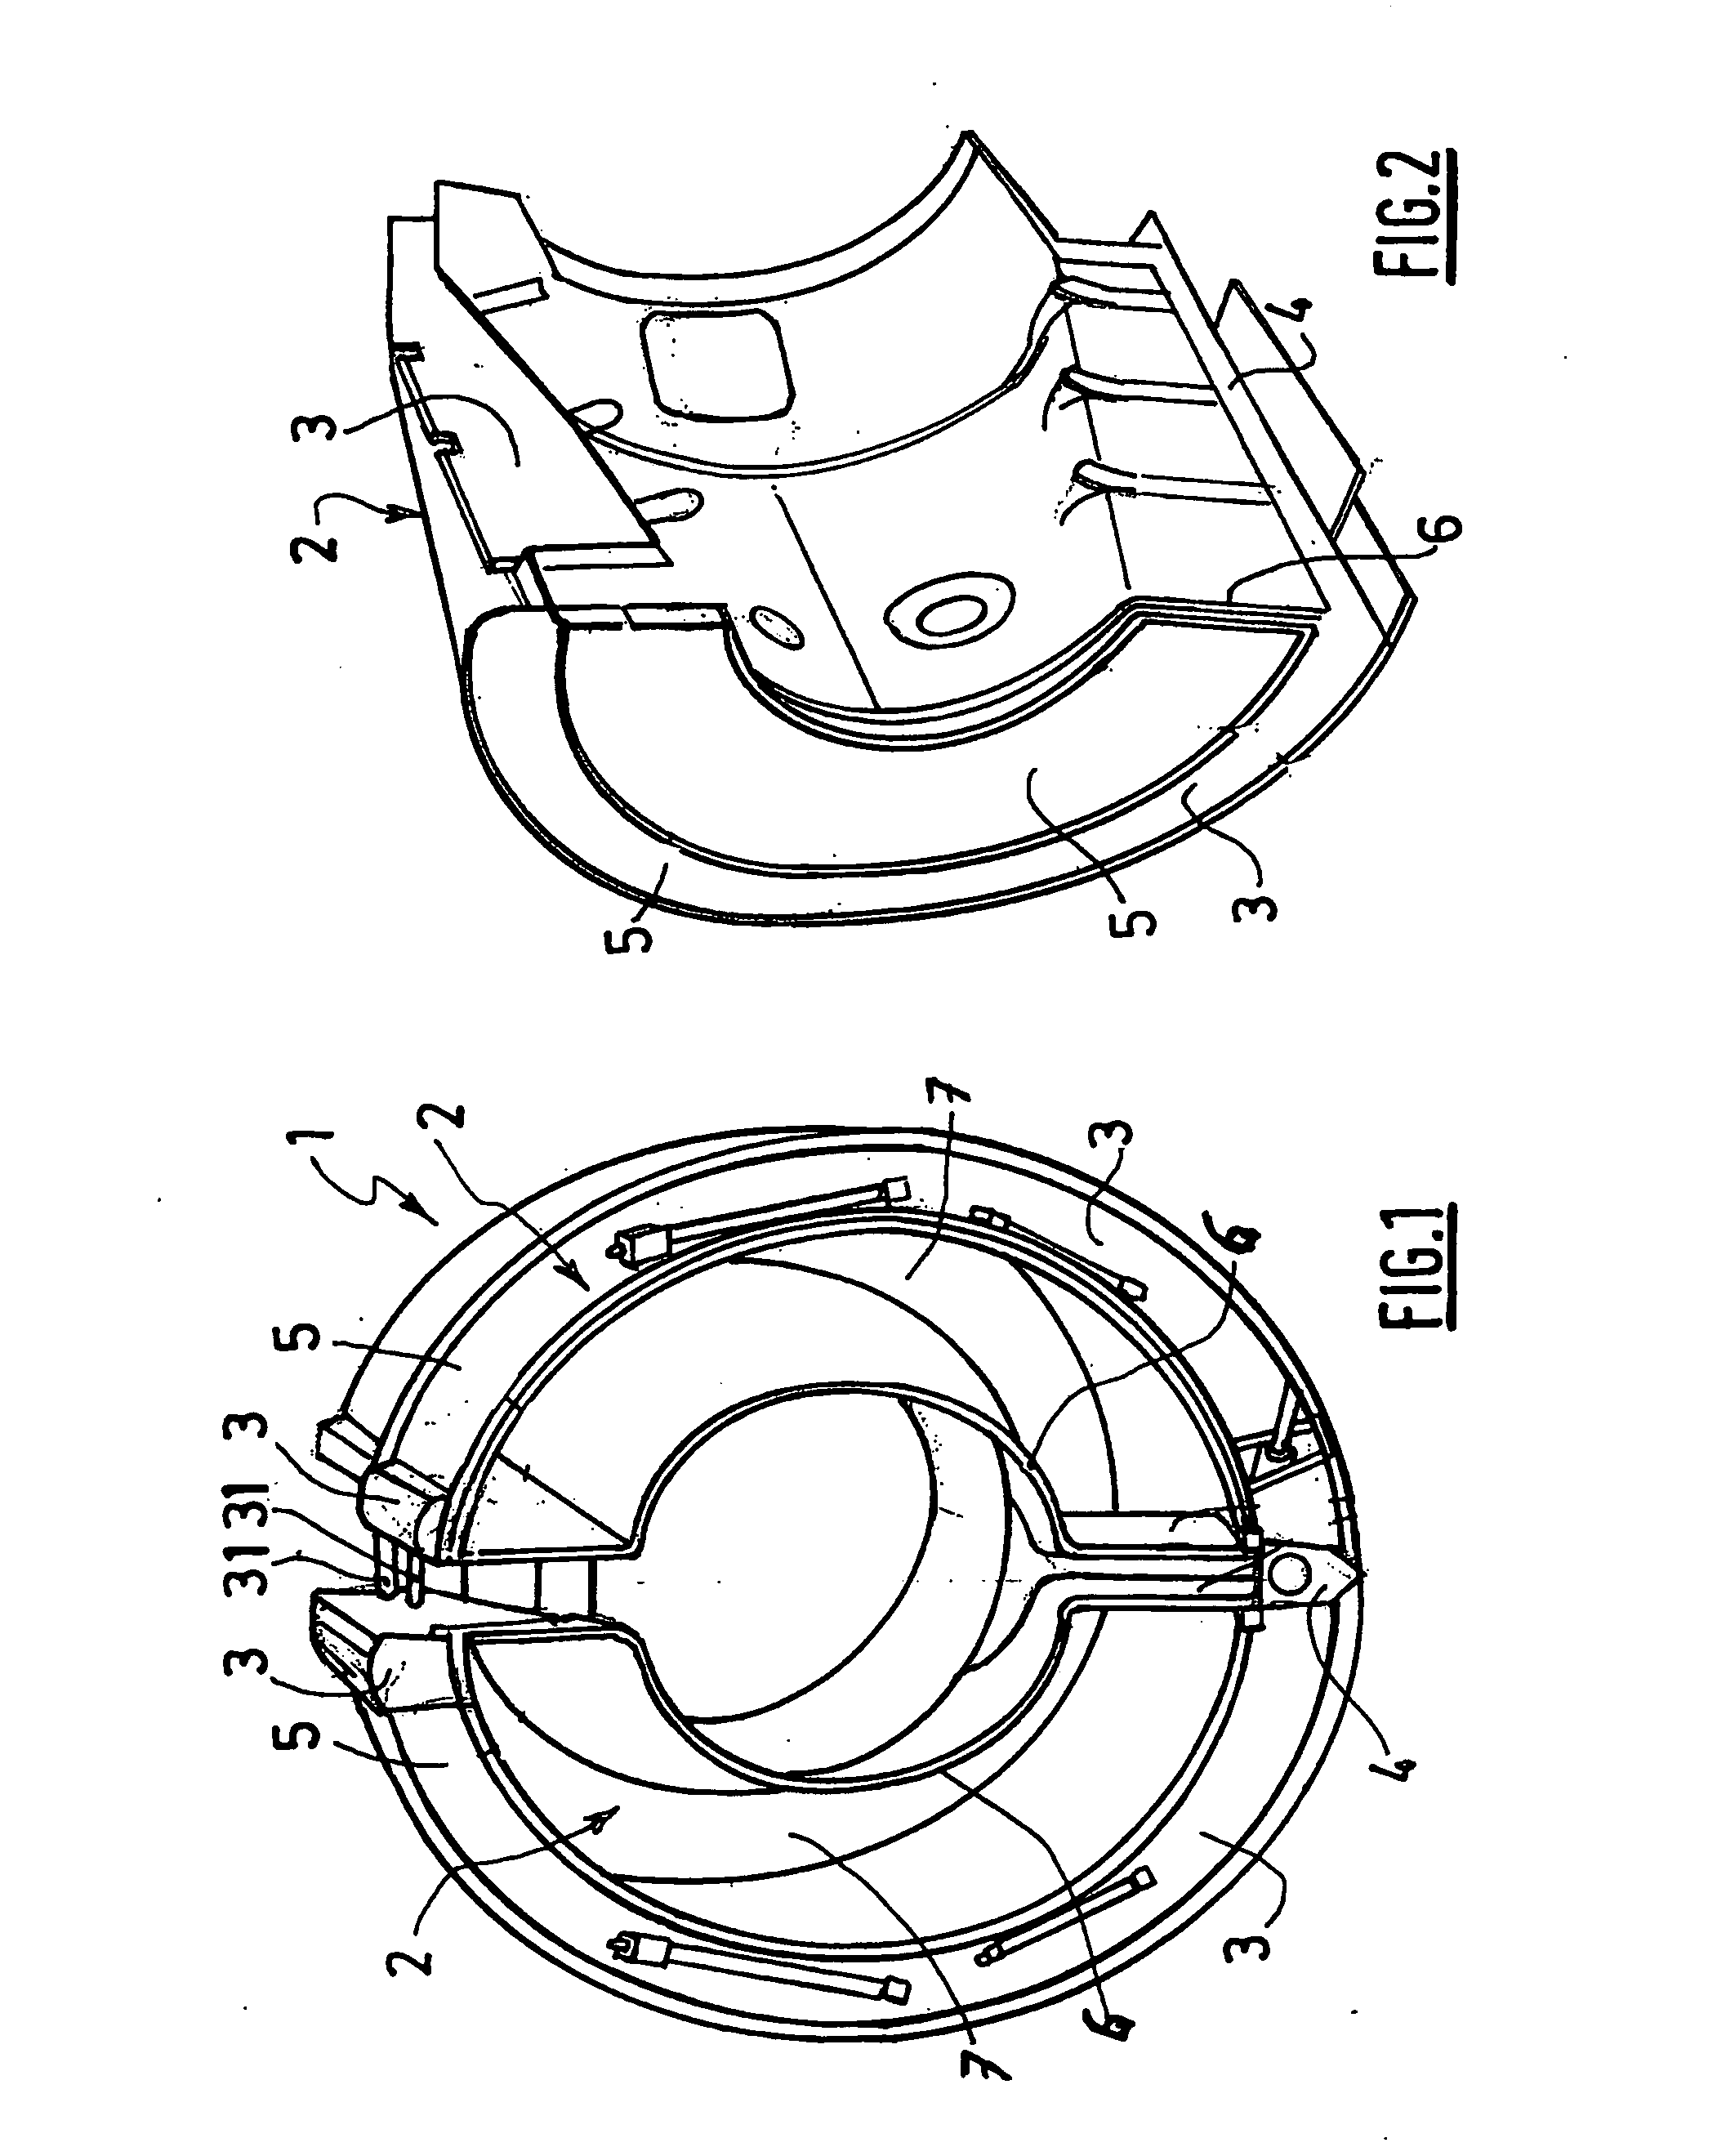 Coupling system connecting an internal structure and an external stucture of a jet engine nacelle